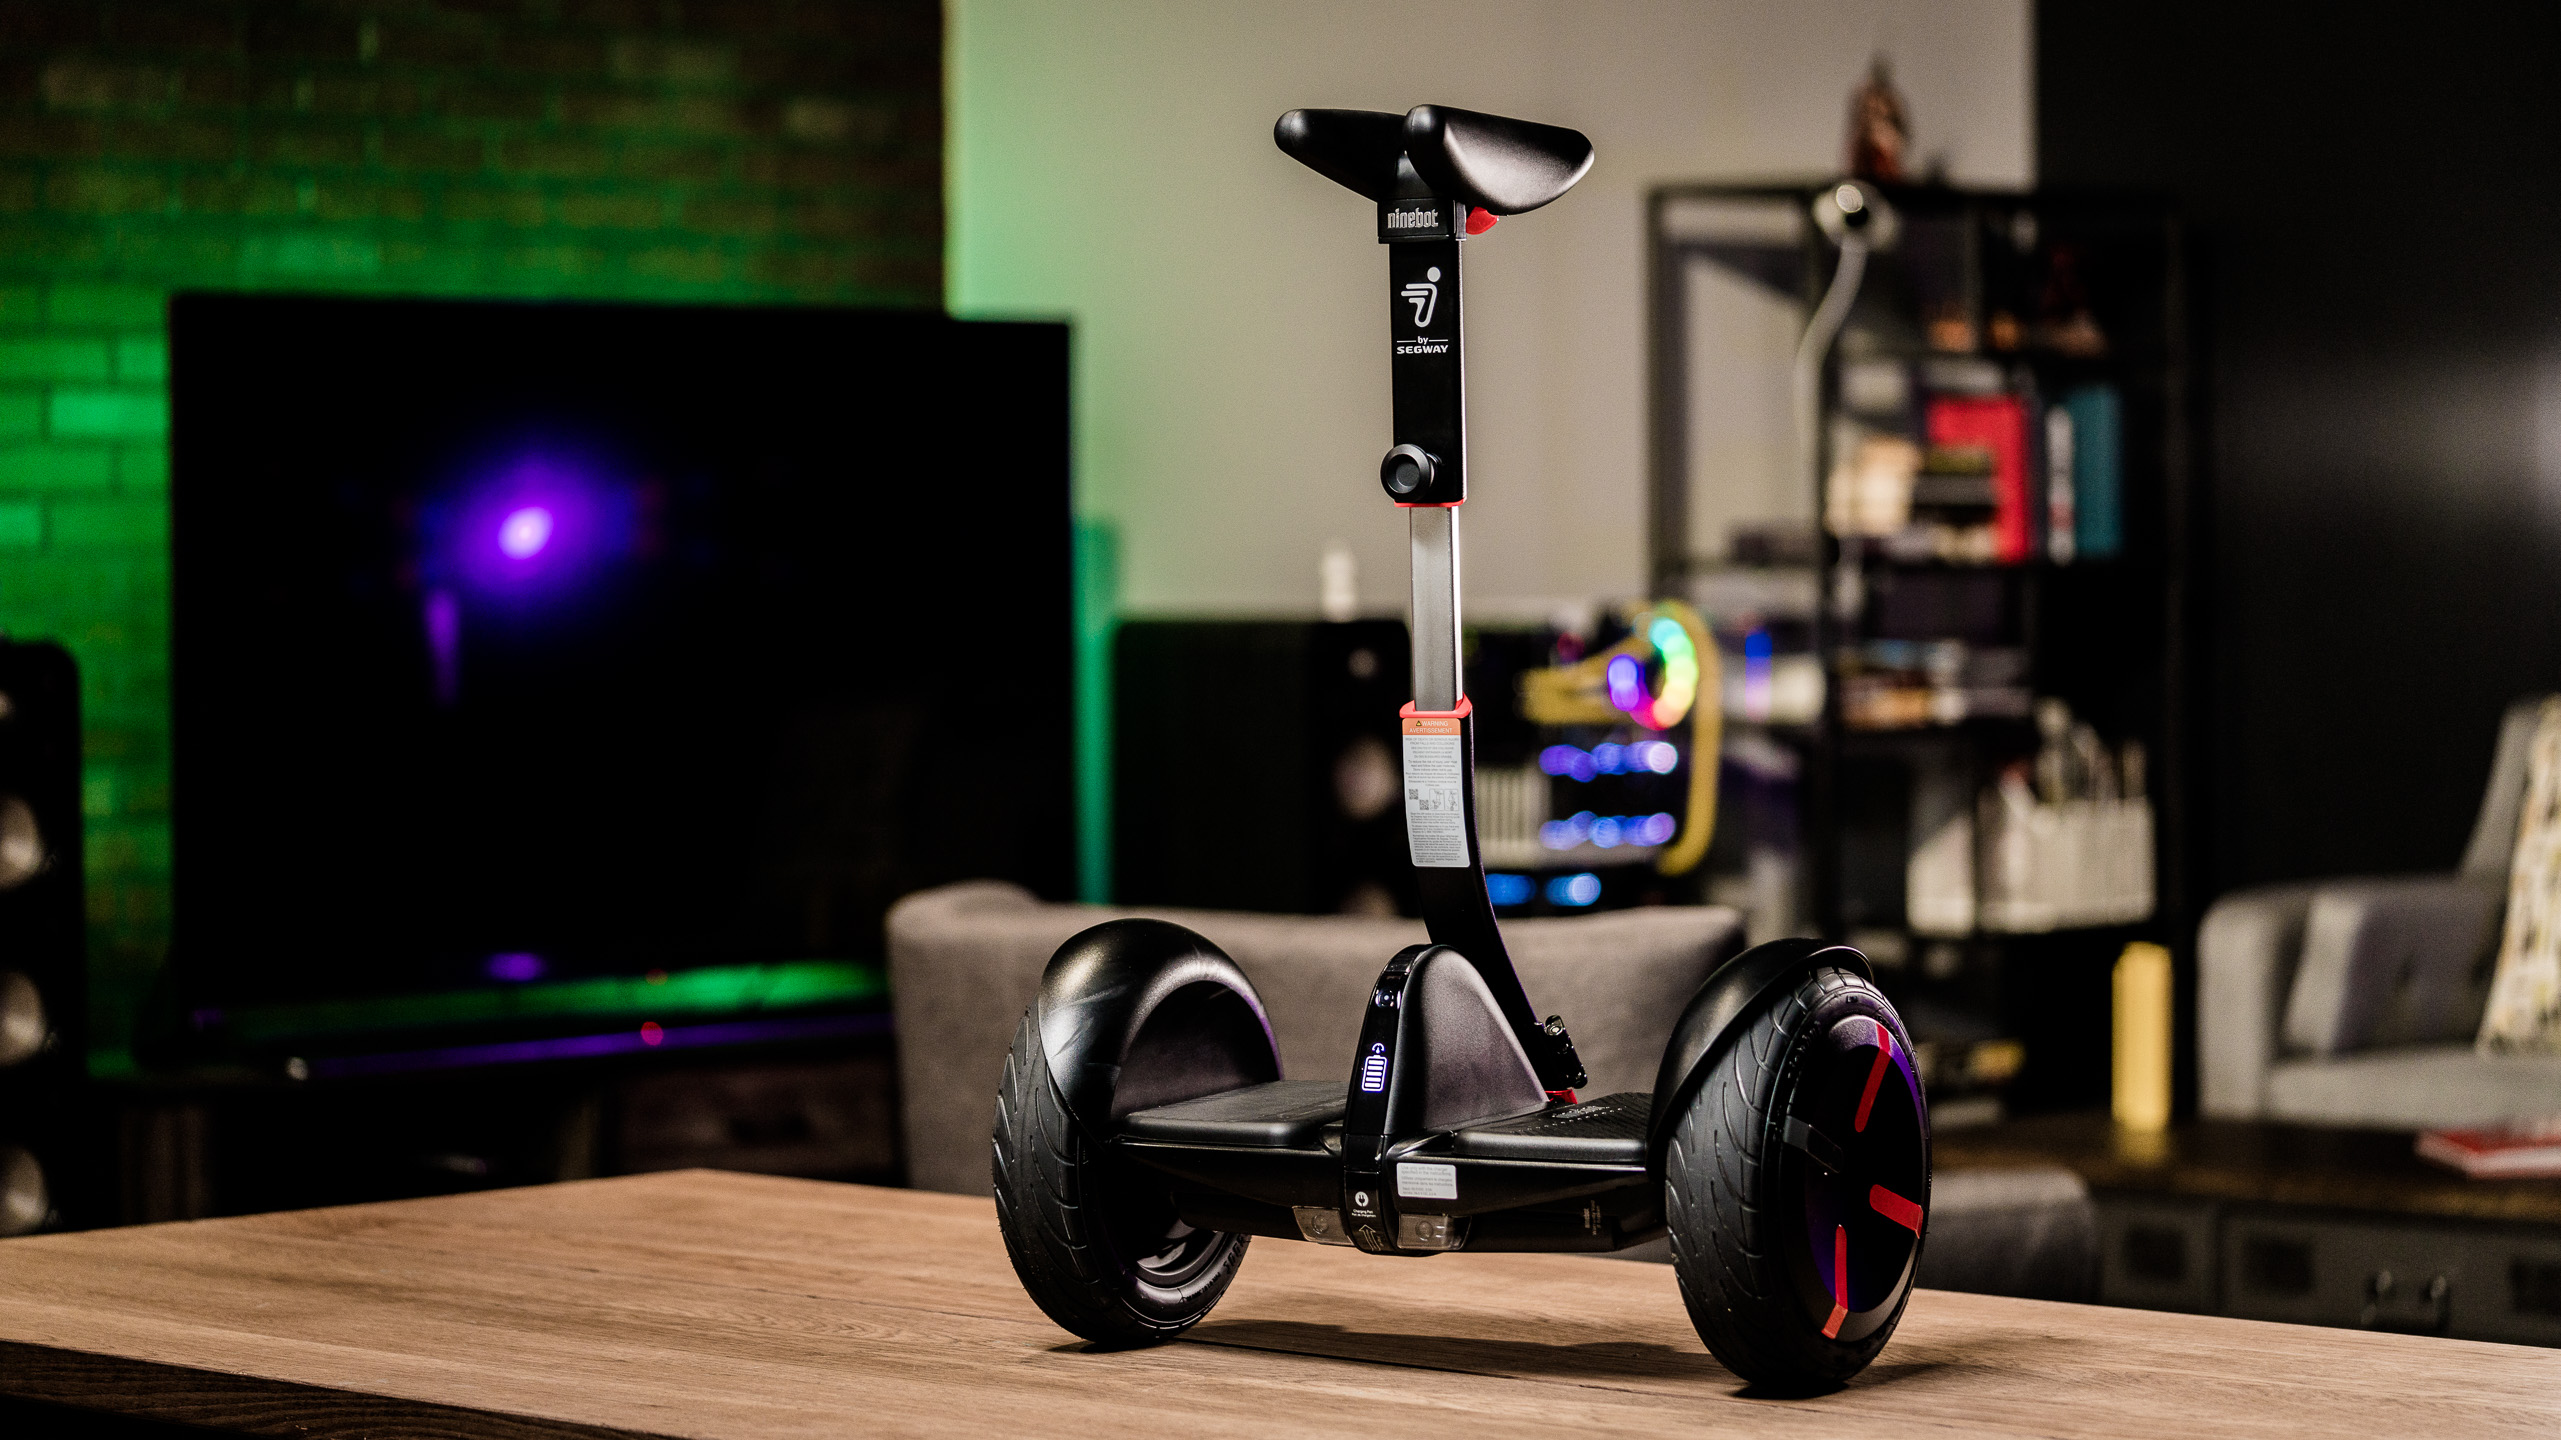 Ninebot by Segway's miniPRO electric personal transportation is compact, quick to charge, and speedy.